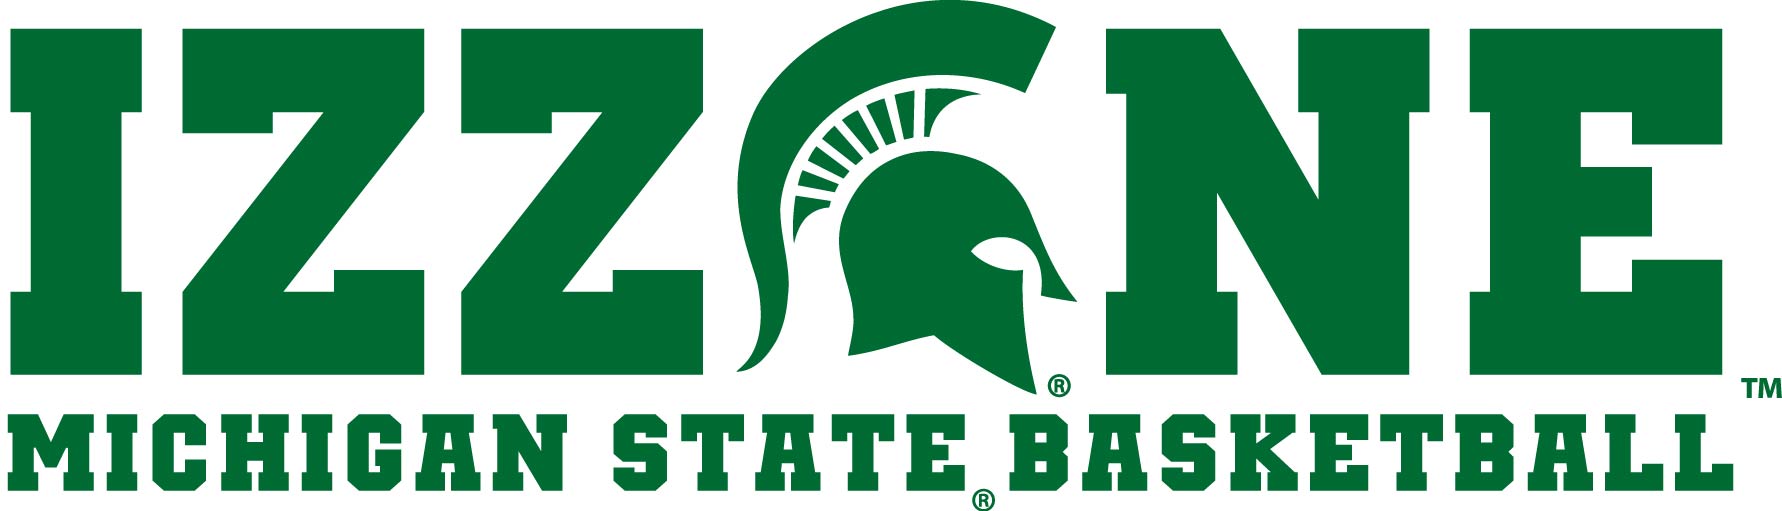 Michigan State Basketball Publish with Glogster